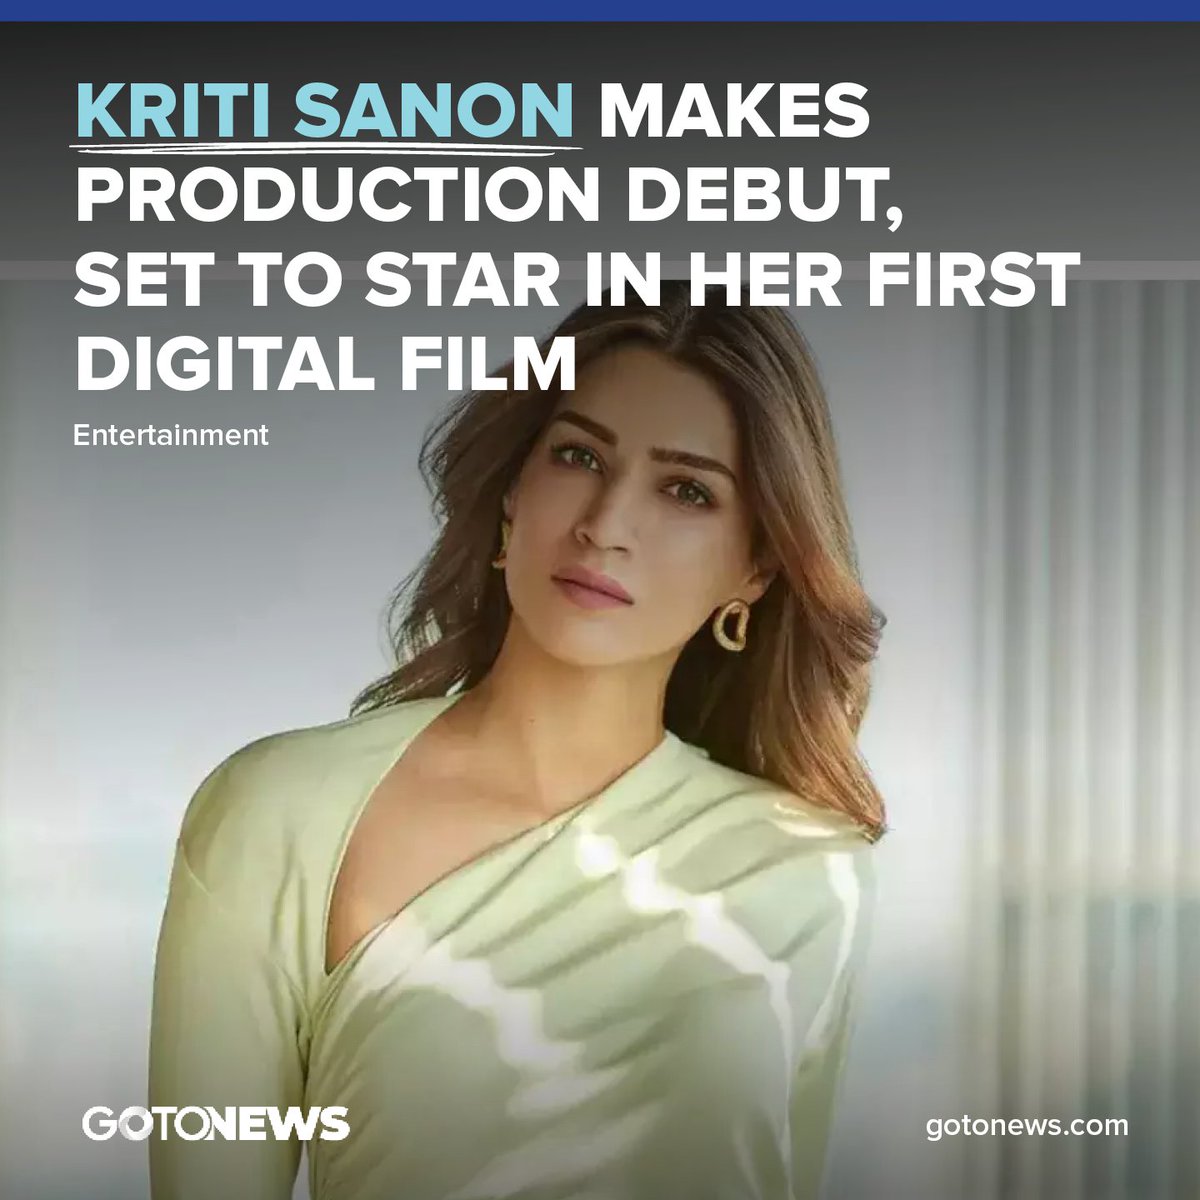 Entering the world of production, Kriti Sanon has embarked on her first venture as a producer in the entertainment industry. 

gotonews.com/entertainment/
#entertainment #bollywood #kritisanon #production #indian #cinema #OTTfilm #talented #actress #gotonews